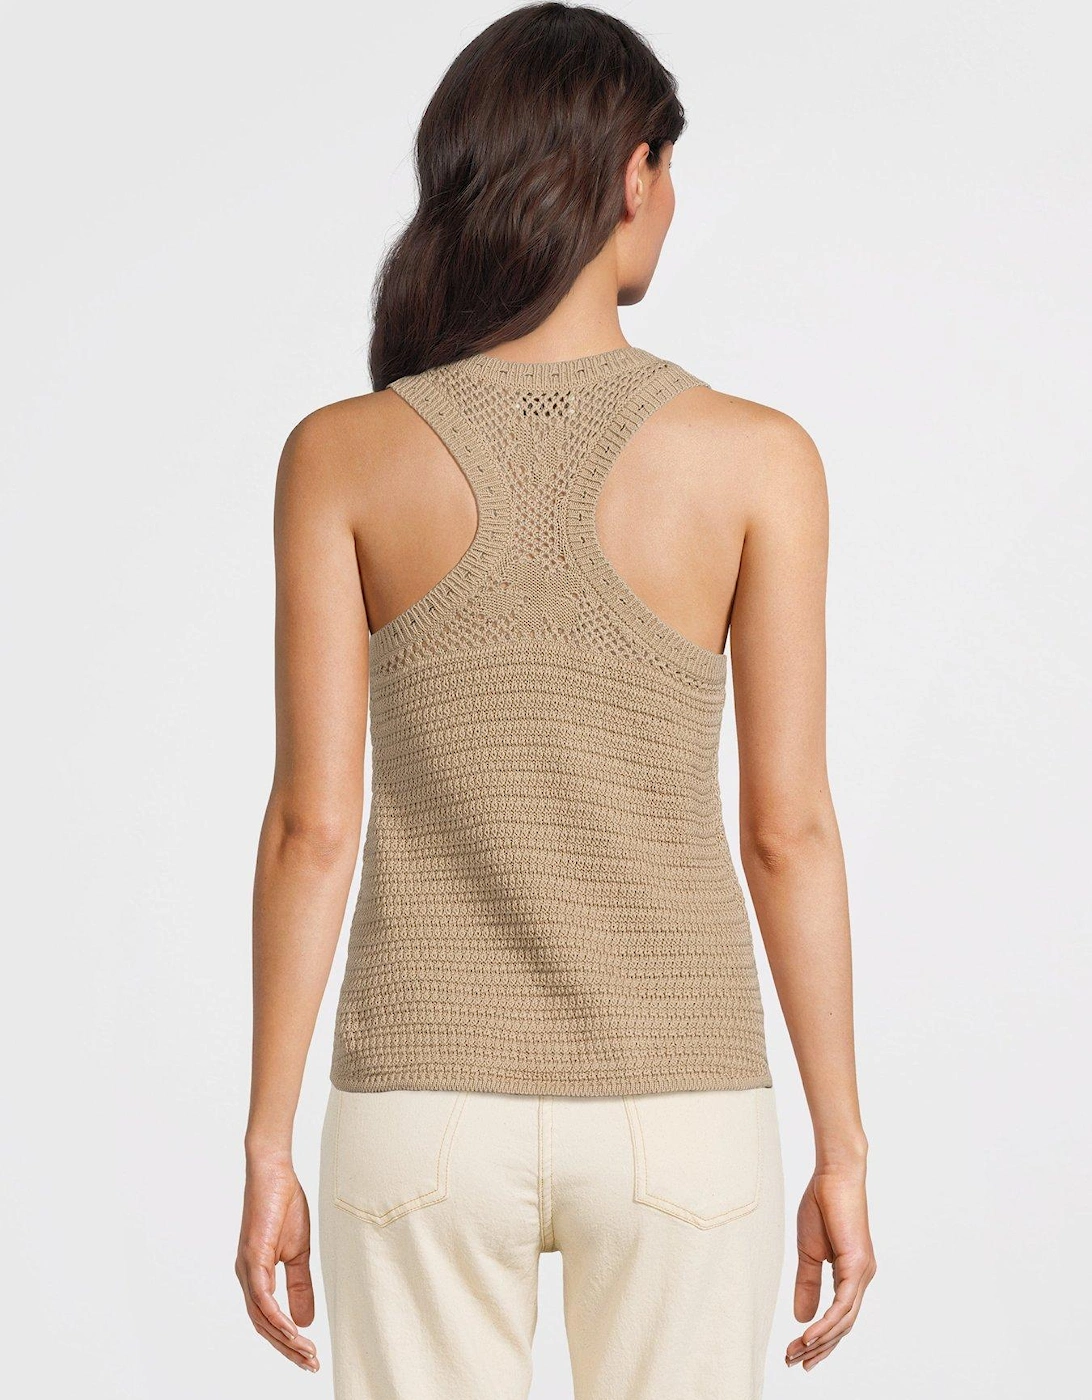 Knitted Vest Top - Brown